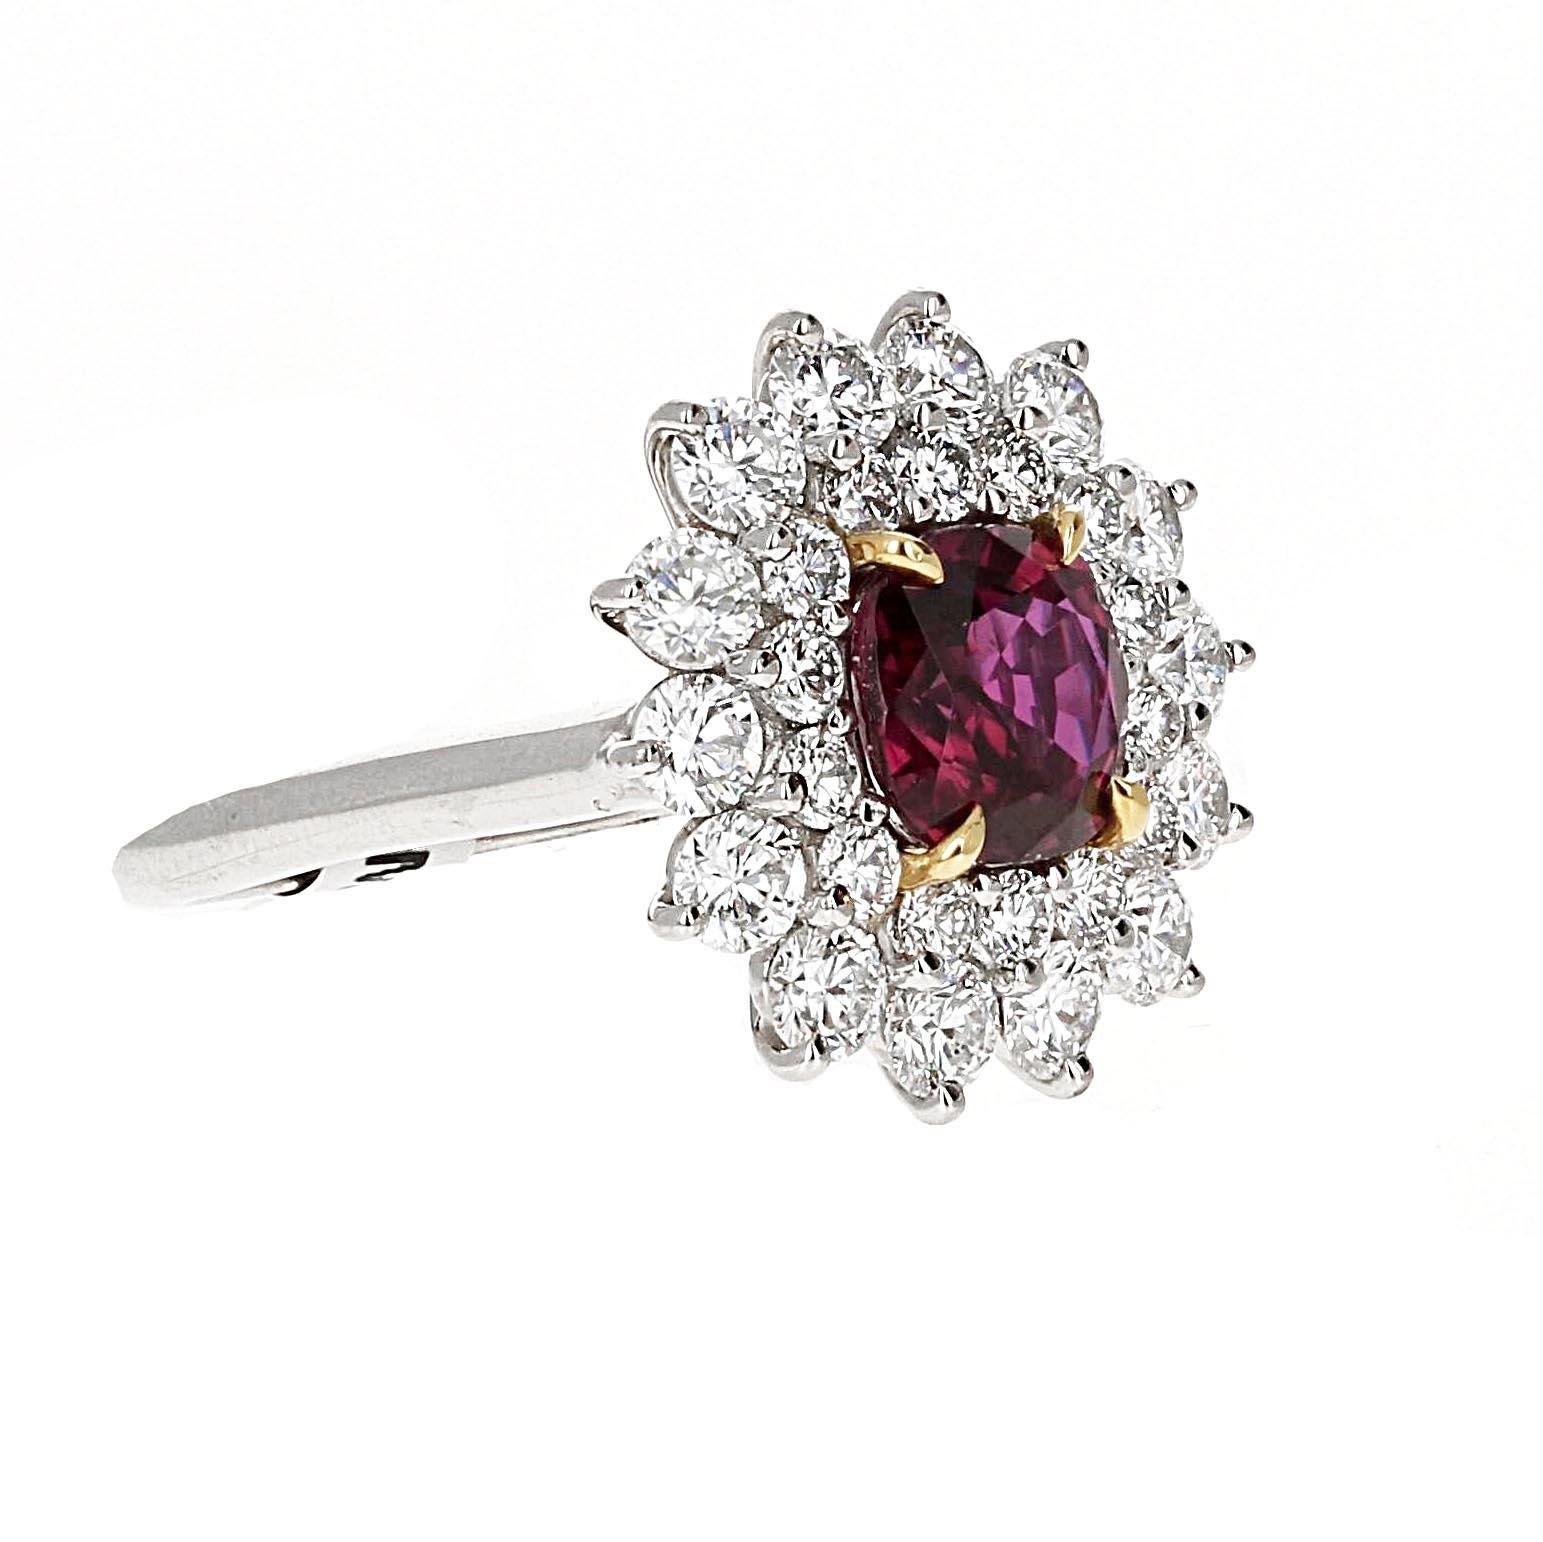 Tiffany & Co. GIA-certified 2.22-carat Thailand No Heat Ruby Cushion Cut Ring with 2 carats of colorless diamonds in a one-of-a-kind halo design

The center stone in the remarkable ring is the 2.22-carat ruby, sourced from Thailand and certified by